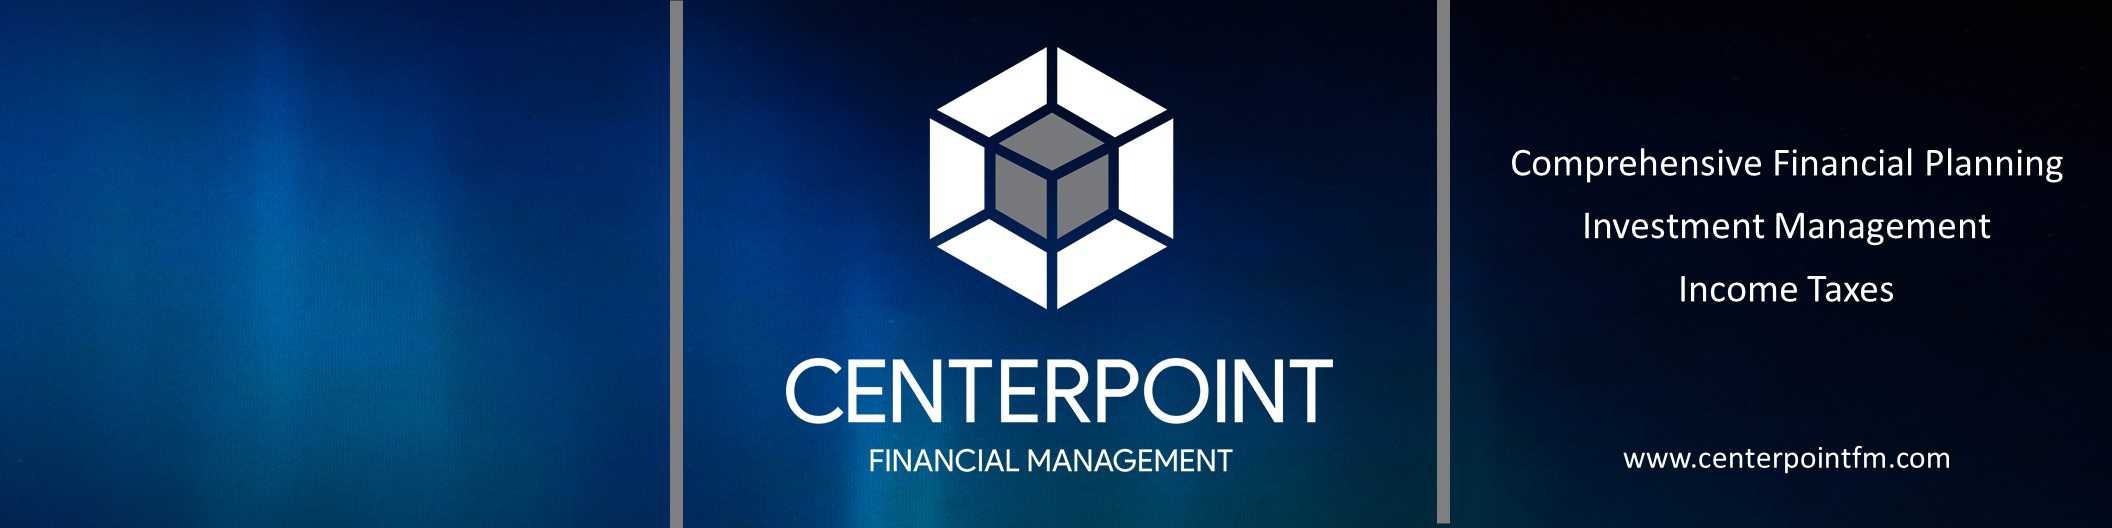 Centerpoint financial management banner showcasing services in comprehensive financial planning, investment management, and income taxes, with a striking blue gradient background and their logo prominently displayed.